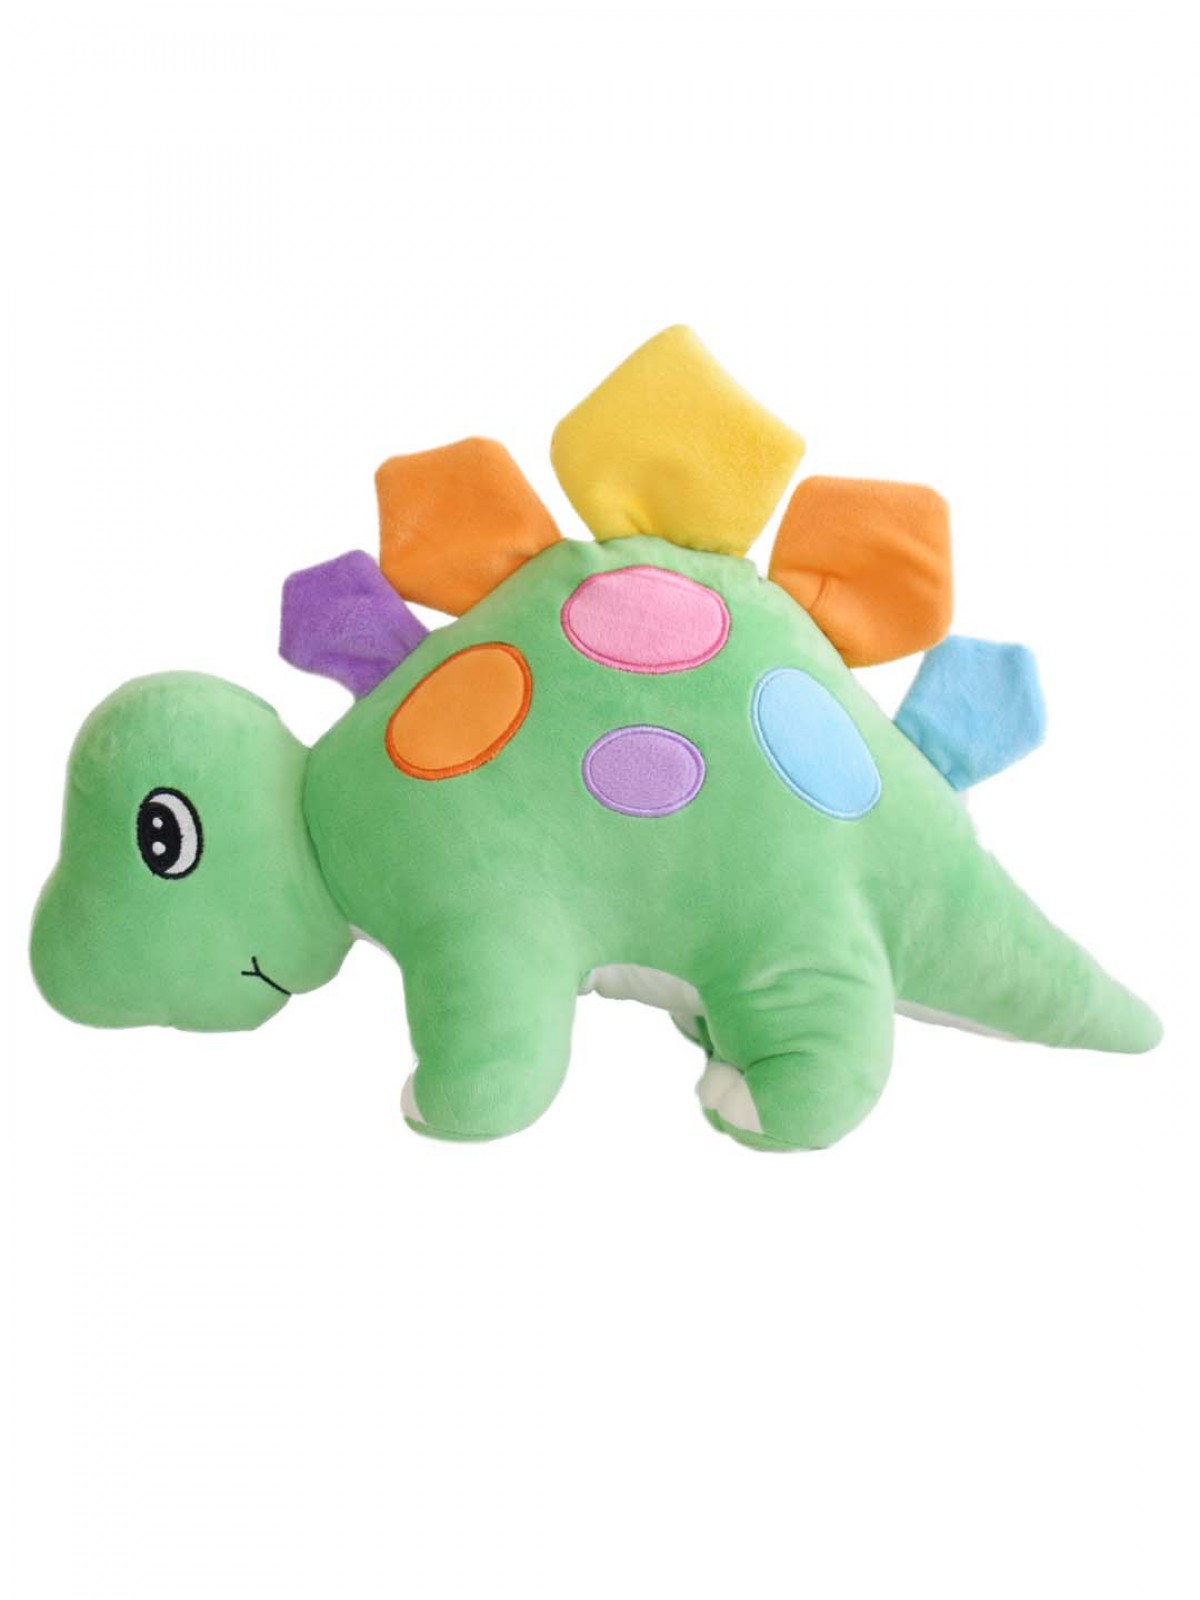 Adorable Stuffed Plush Dinosaur By Mirada, Soft Toys For Kids Of All Ages, 3Y+, Green, 50Cm